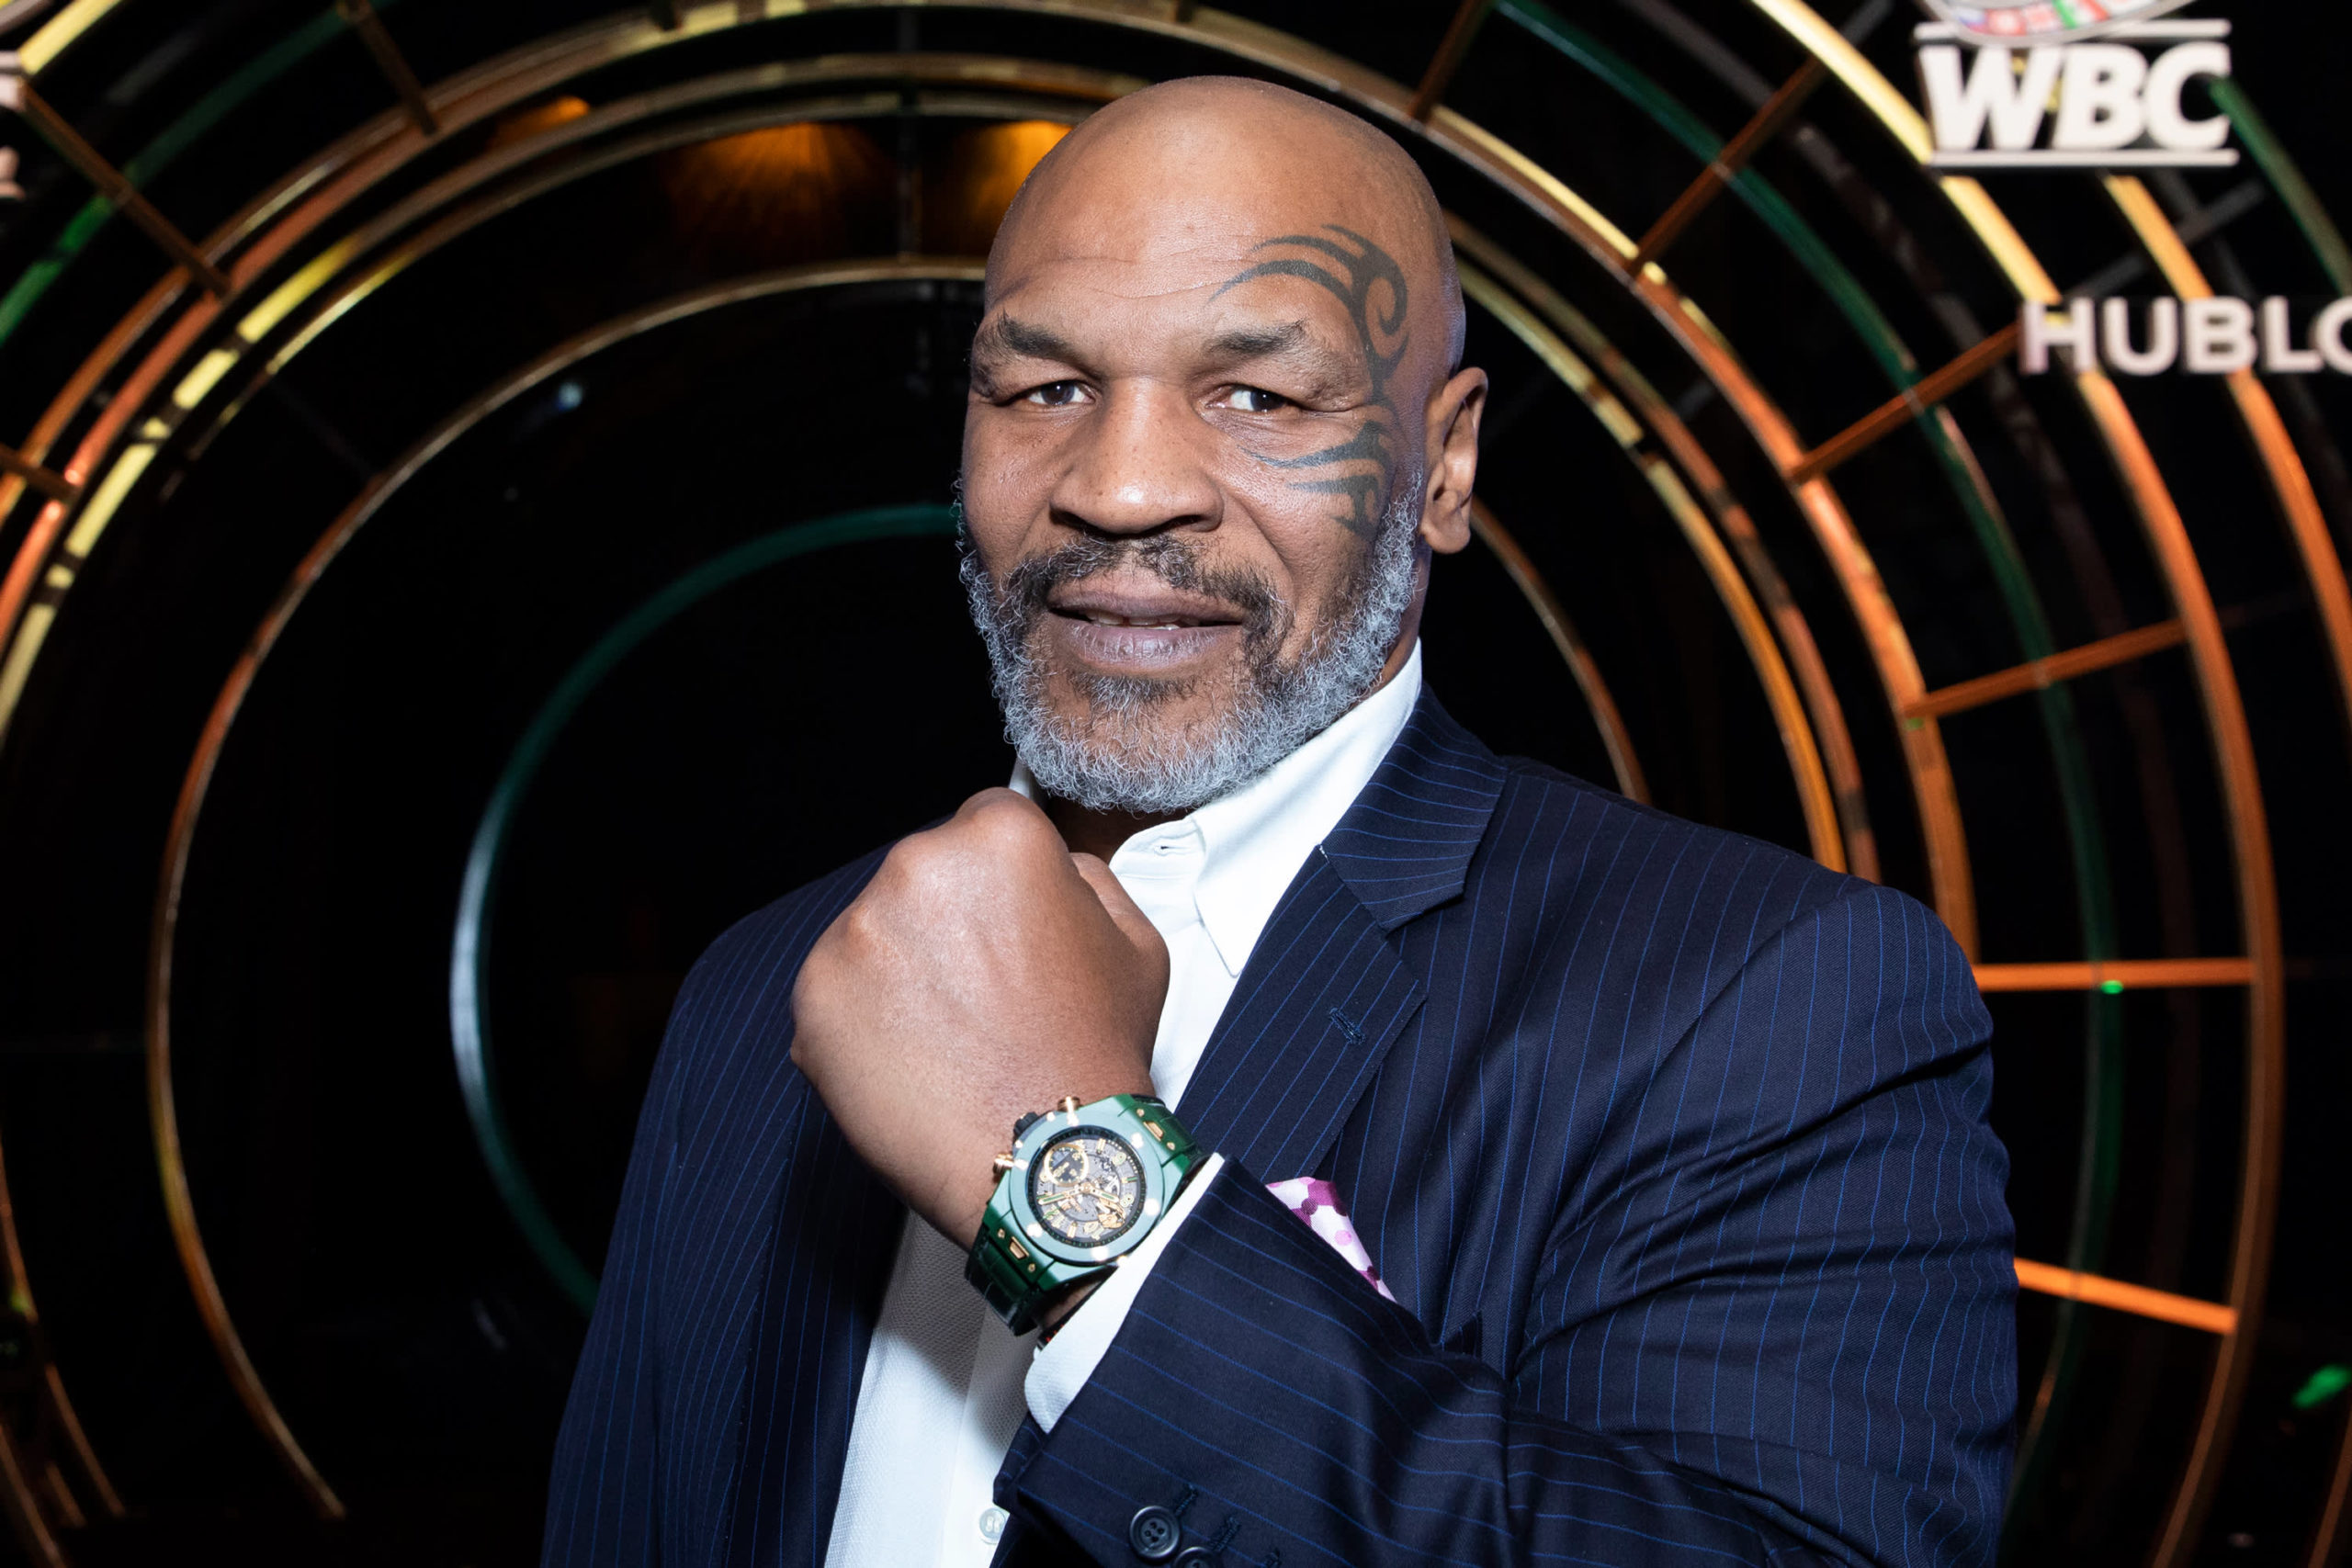 Mike Tyson joins the list of celebrities launching a cannabis line